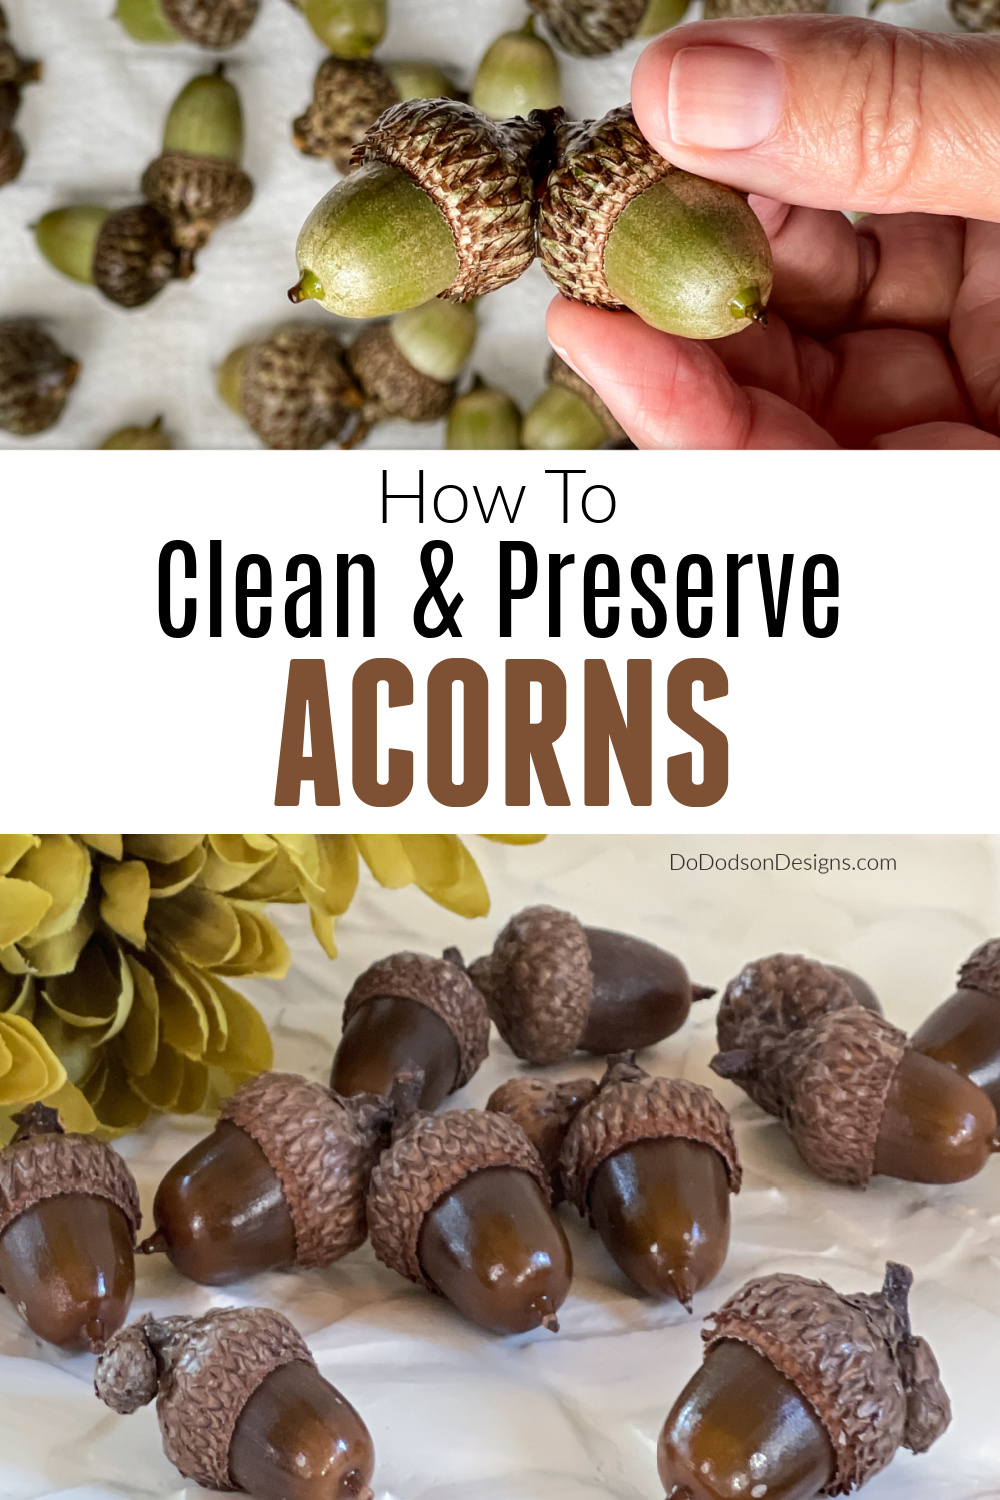 How To Preserve Acorns for Fall Crafts and Decorating - Do Dodson